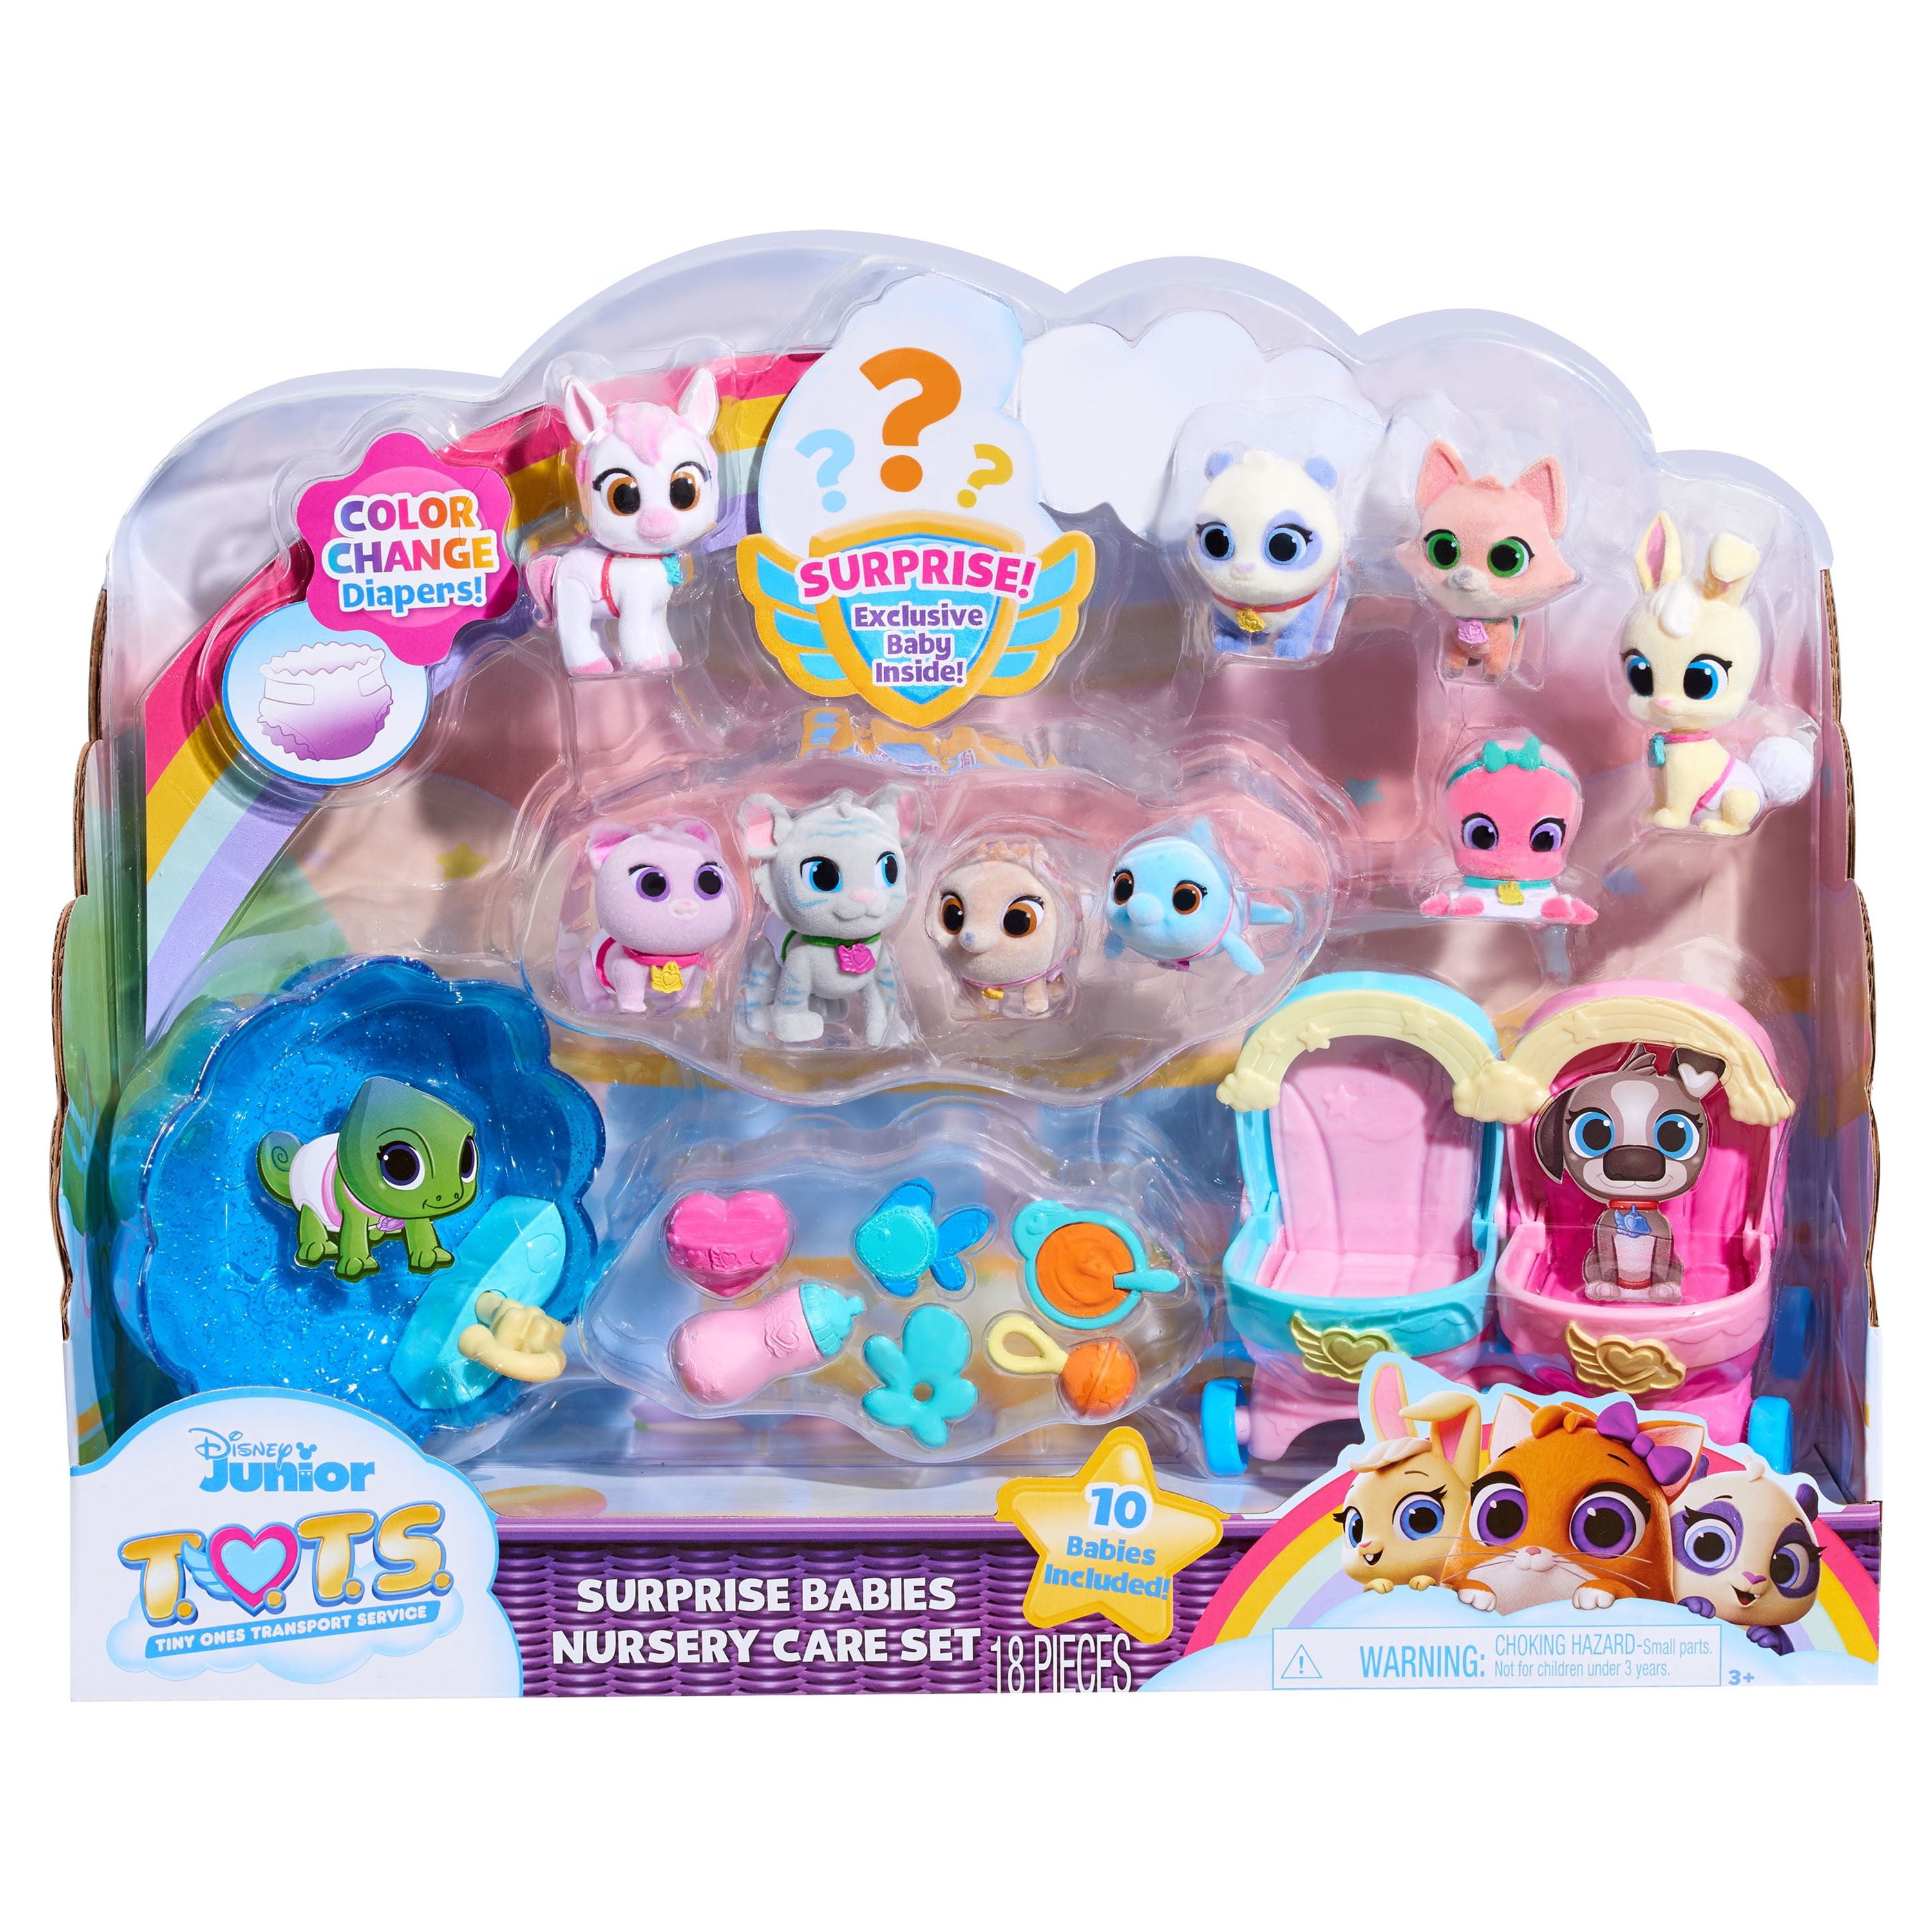 T.O.T.S. Surprise Babies Nursery Care Set, Officially Licensed Kids Toys  for Ages 3 Up, Gifts and Presents 